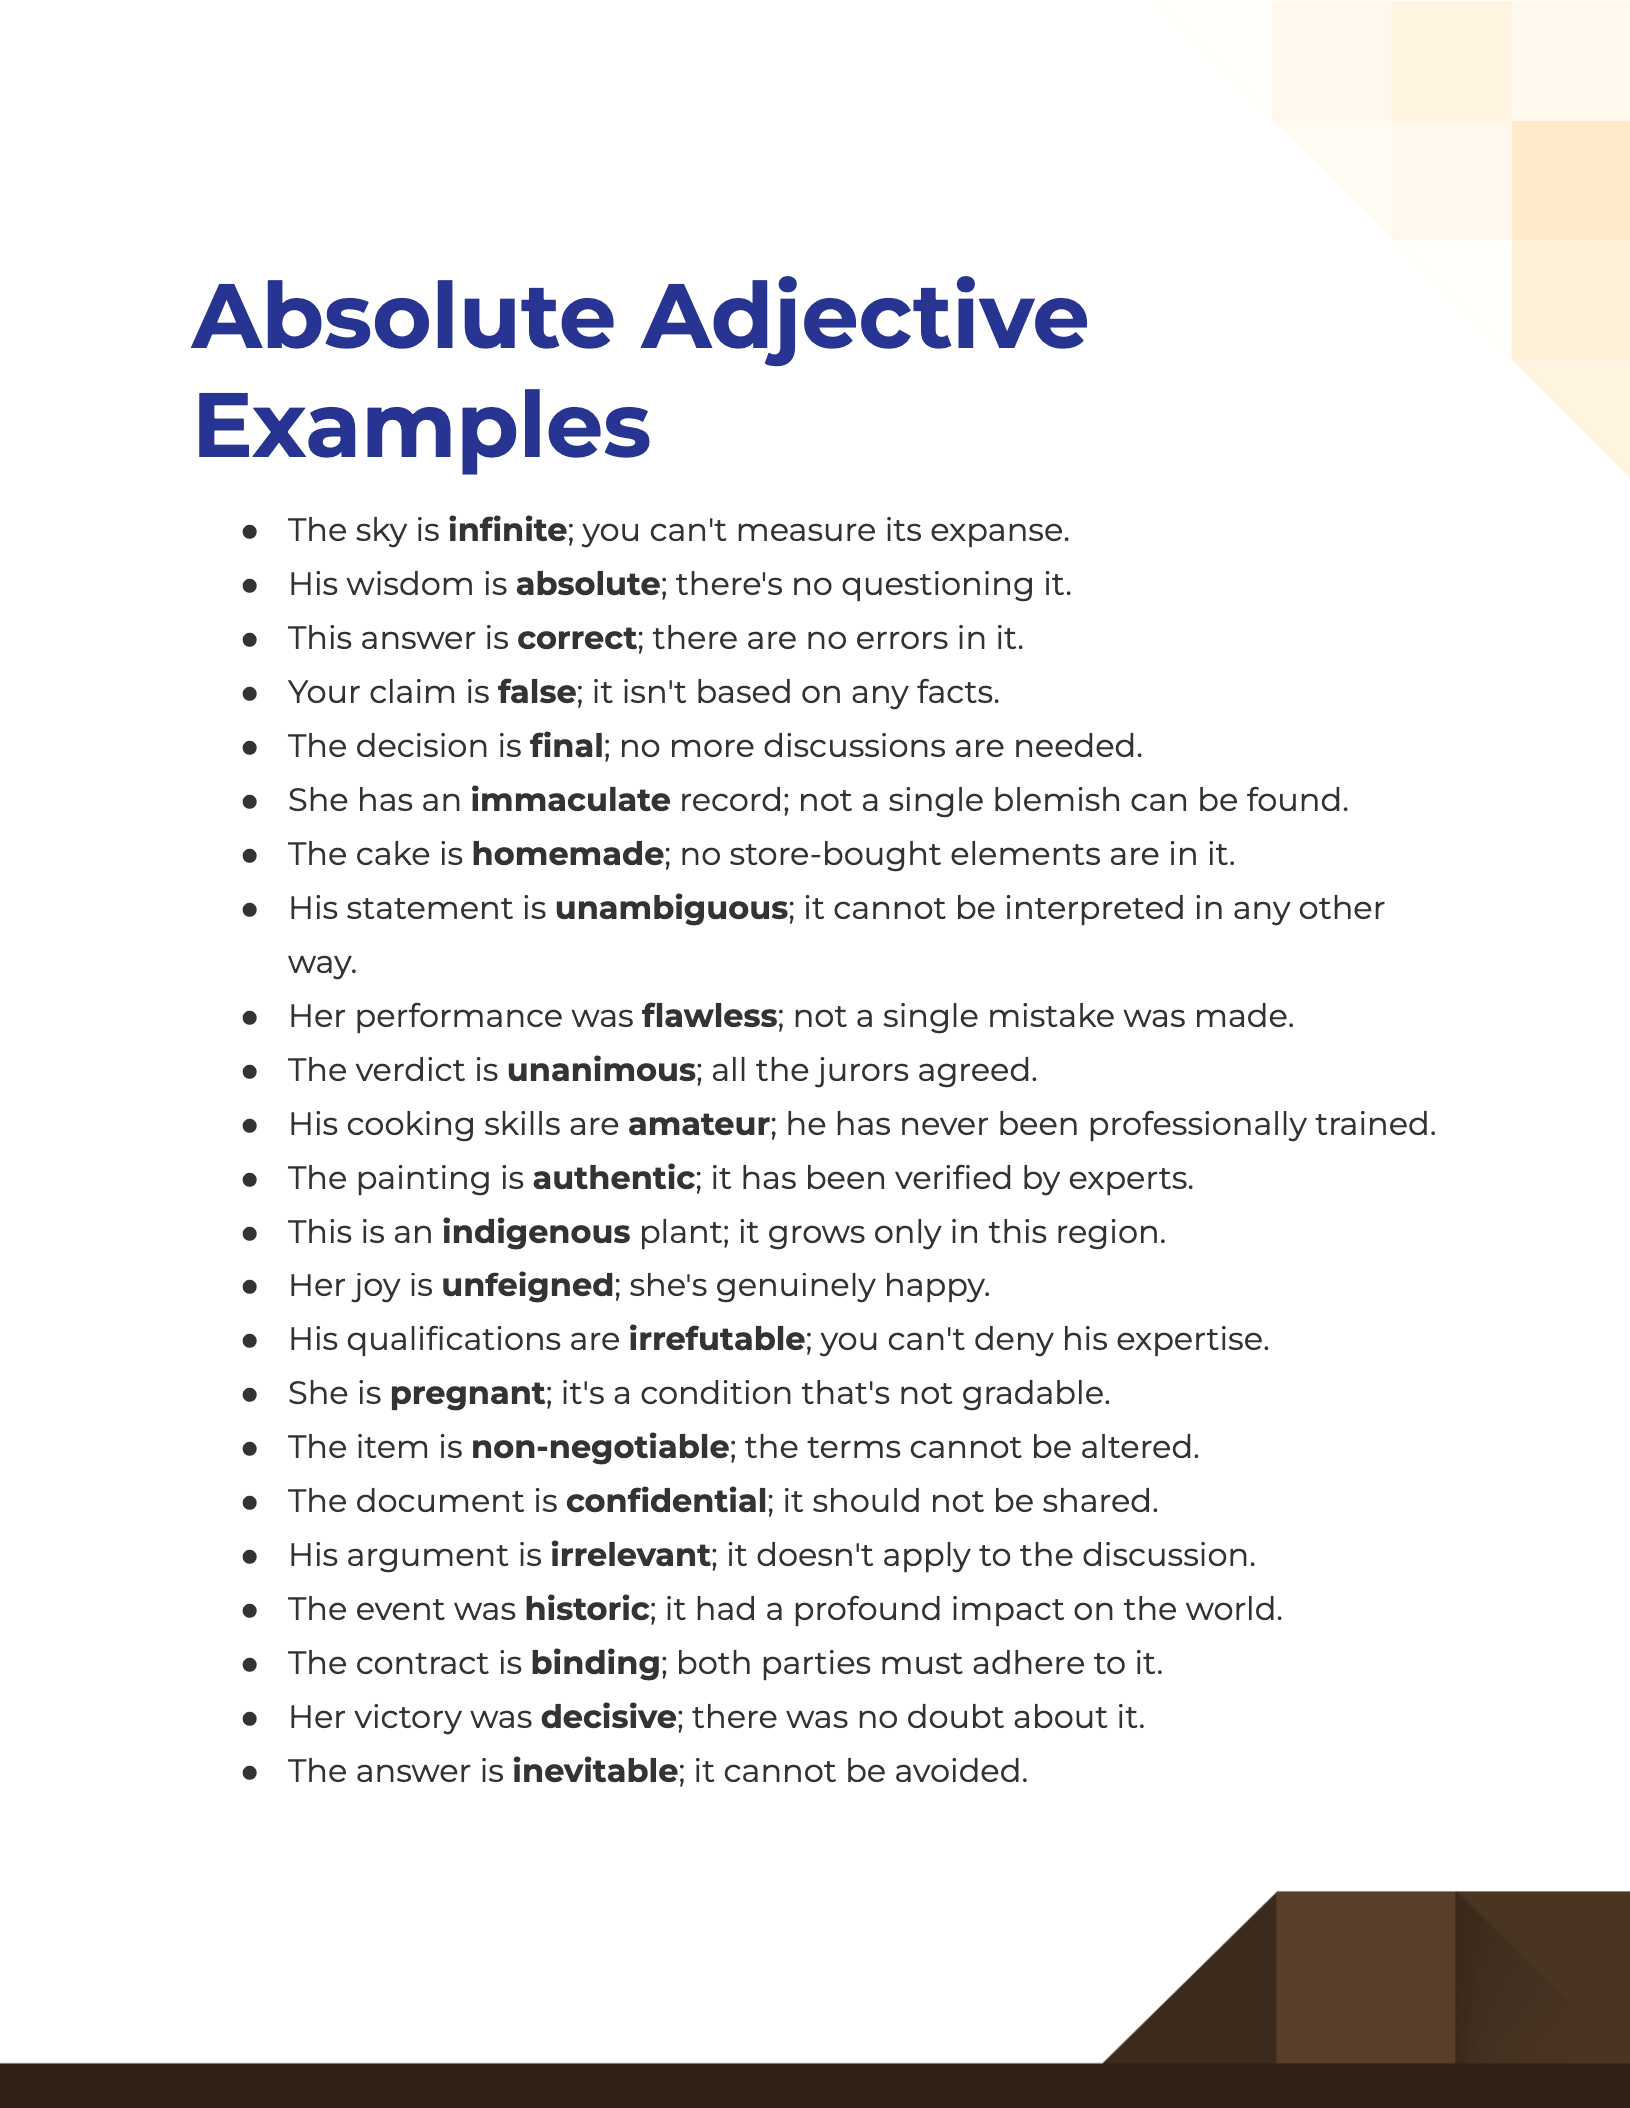 absolute adjective examples1